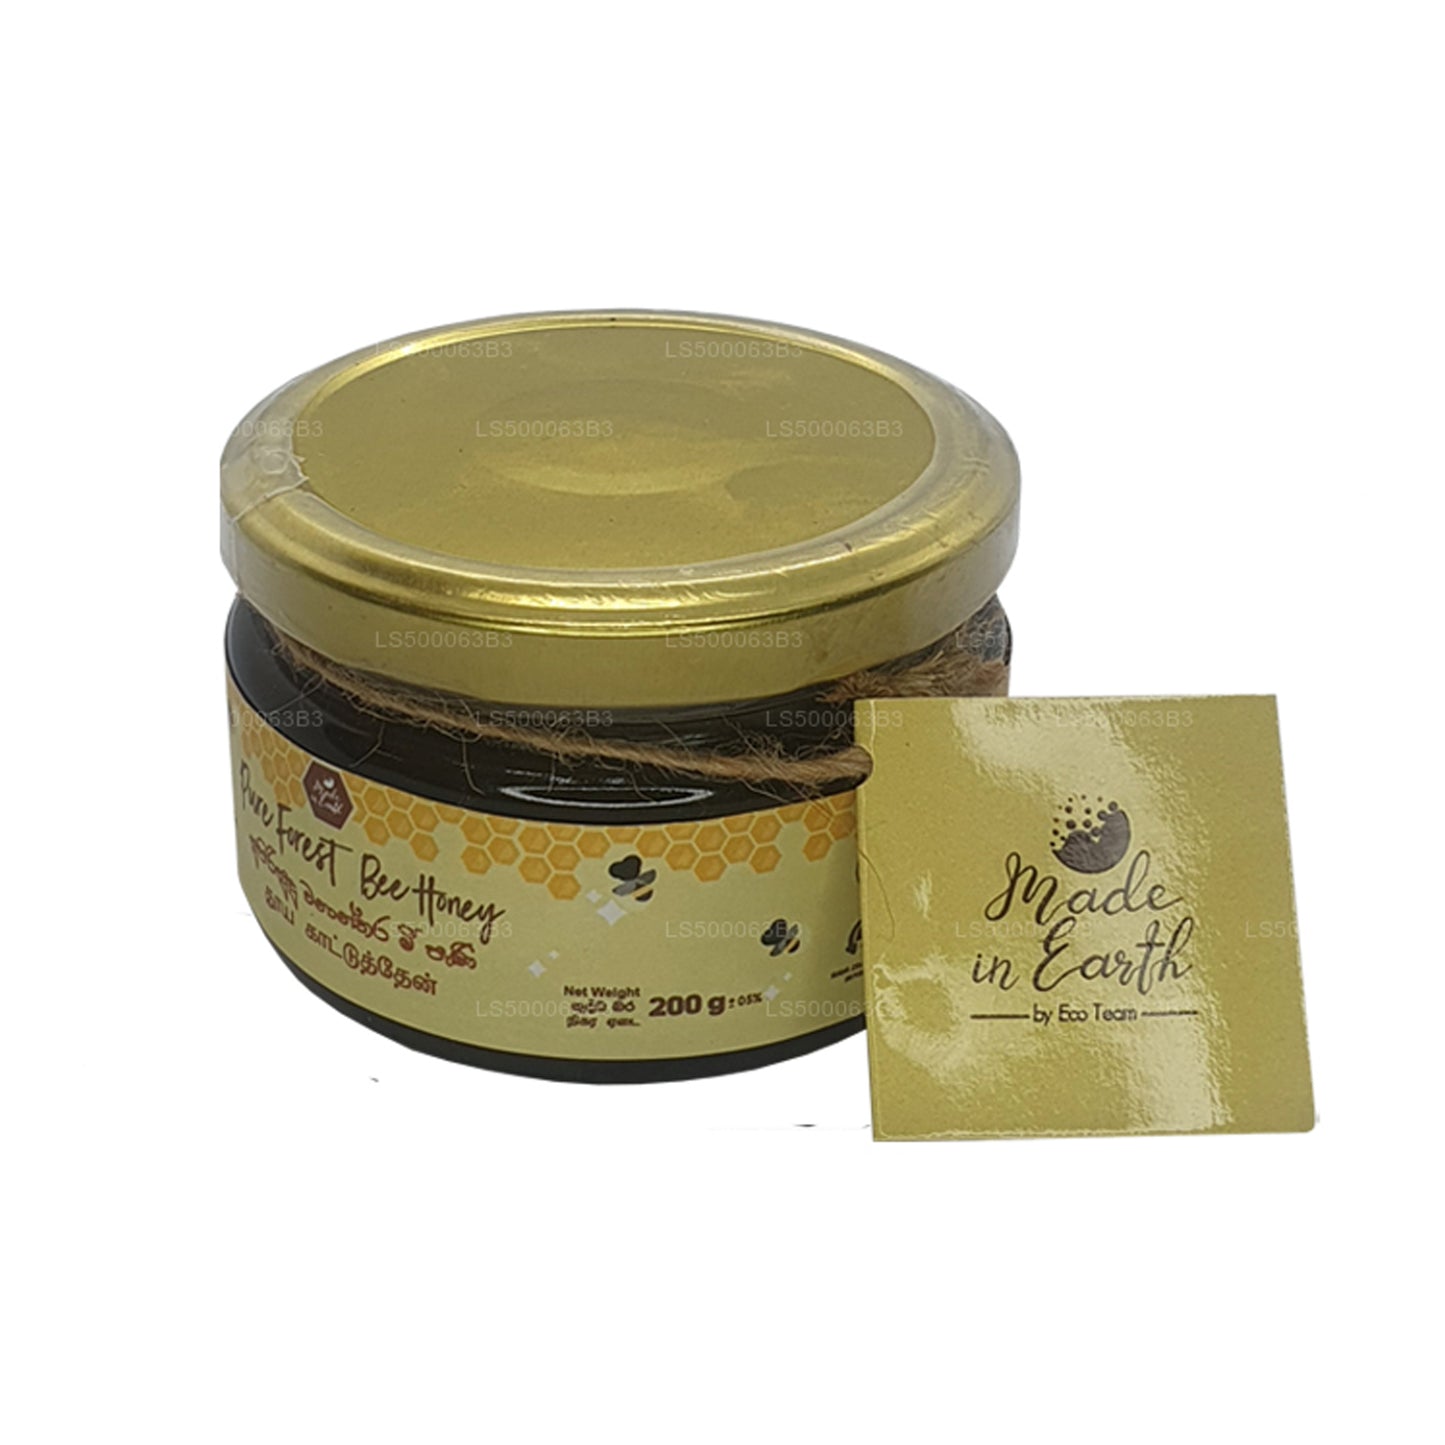 Gemaakt in Earth Pure Forest Bee Honey (200 g)